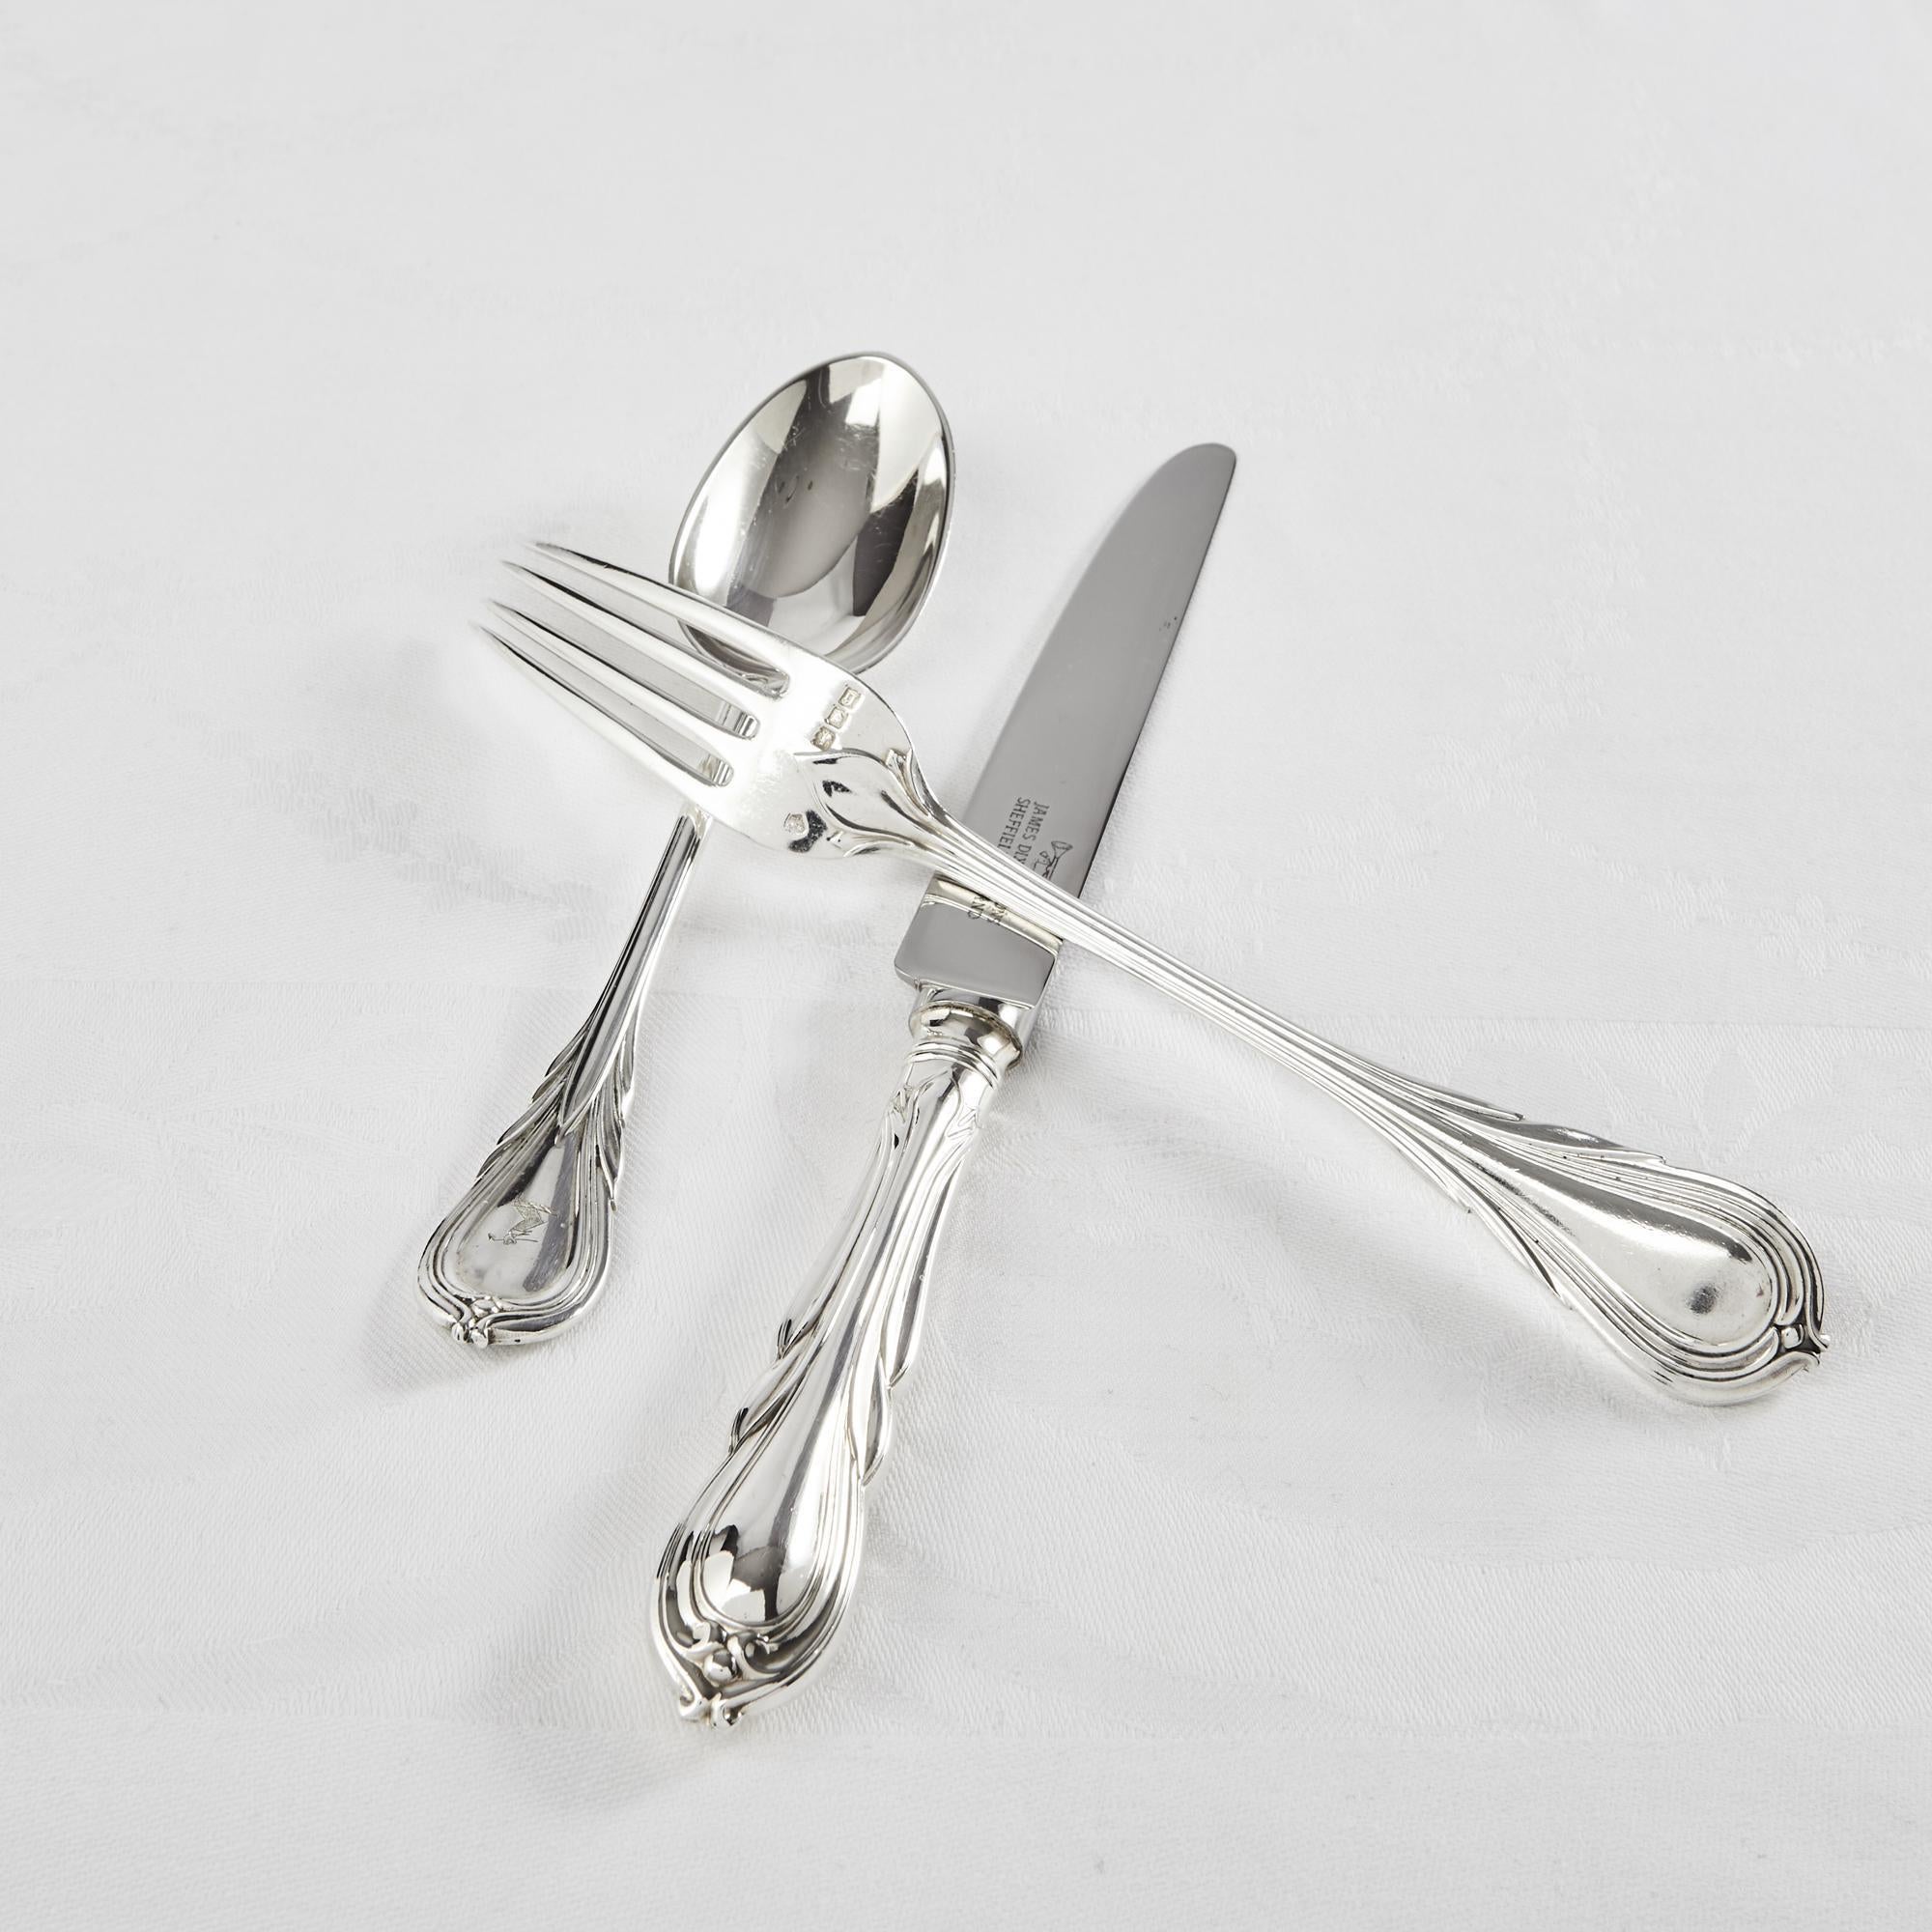 English One Date and Maker, Hand Forged Lily Silver Cutlery